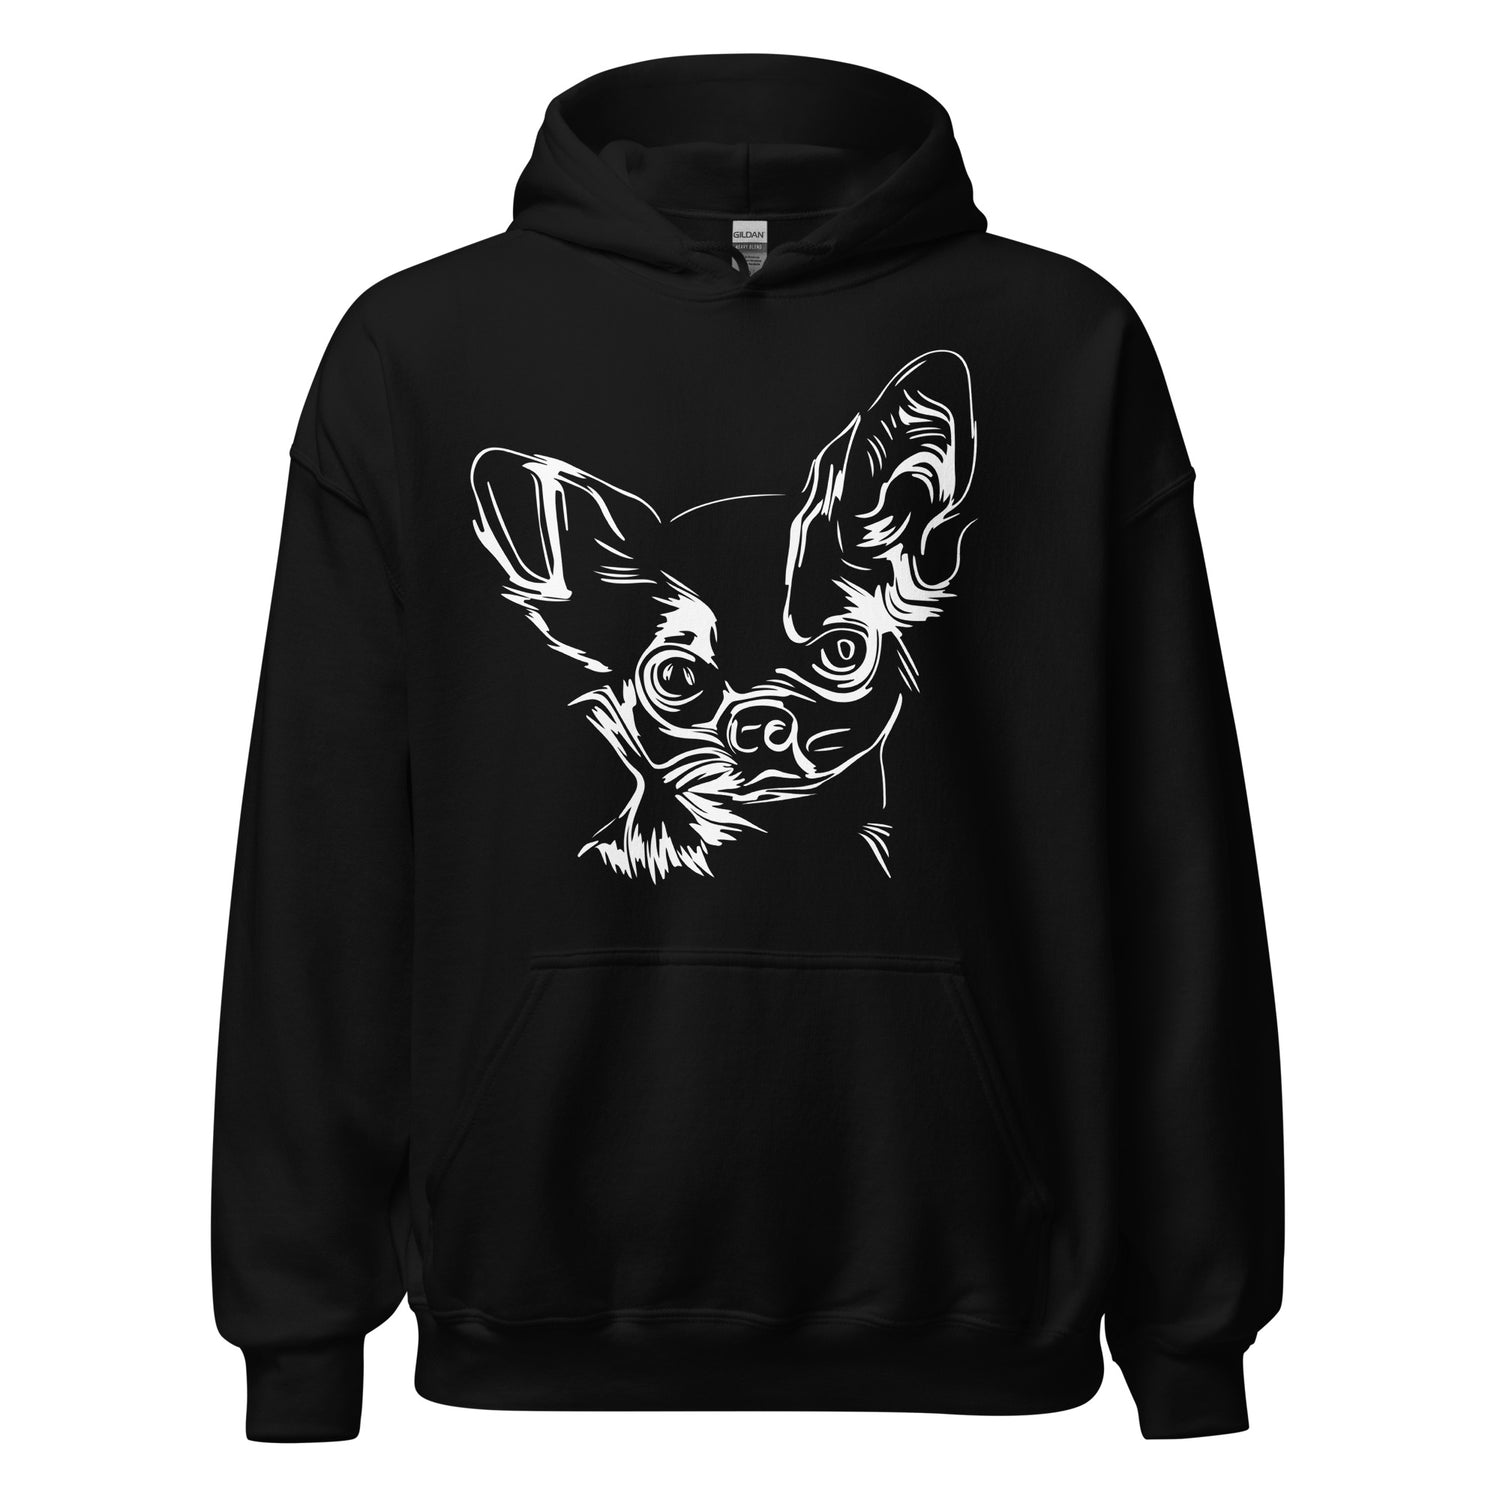 White line Chihuahua face on unisex black hoodie